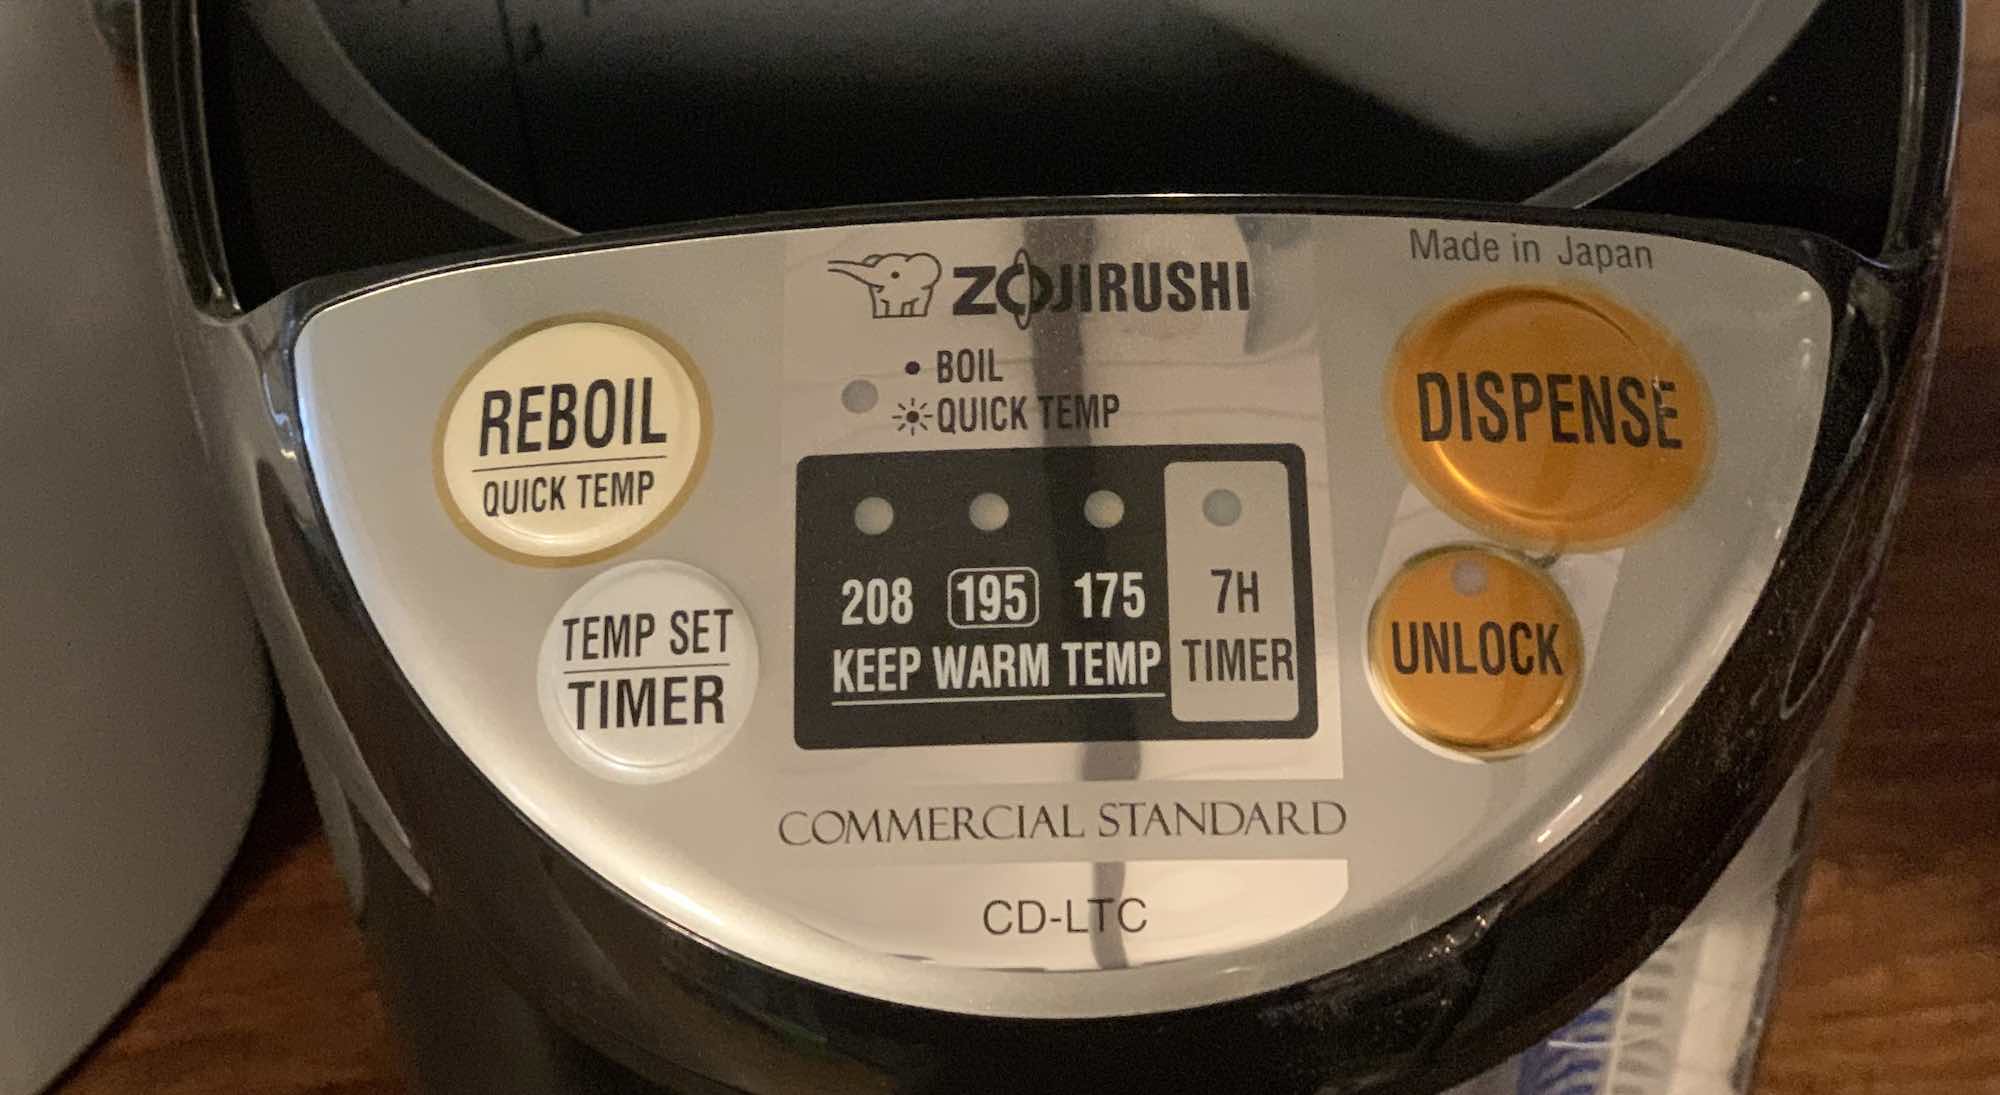 Tiger and Zojirushi Water Boiler and Warmer Blogger Review 